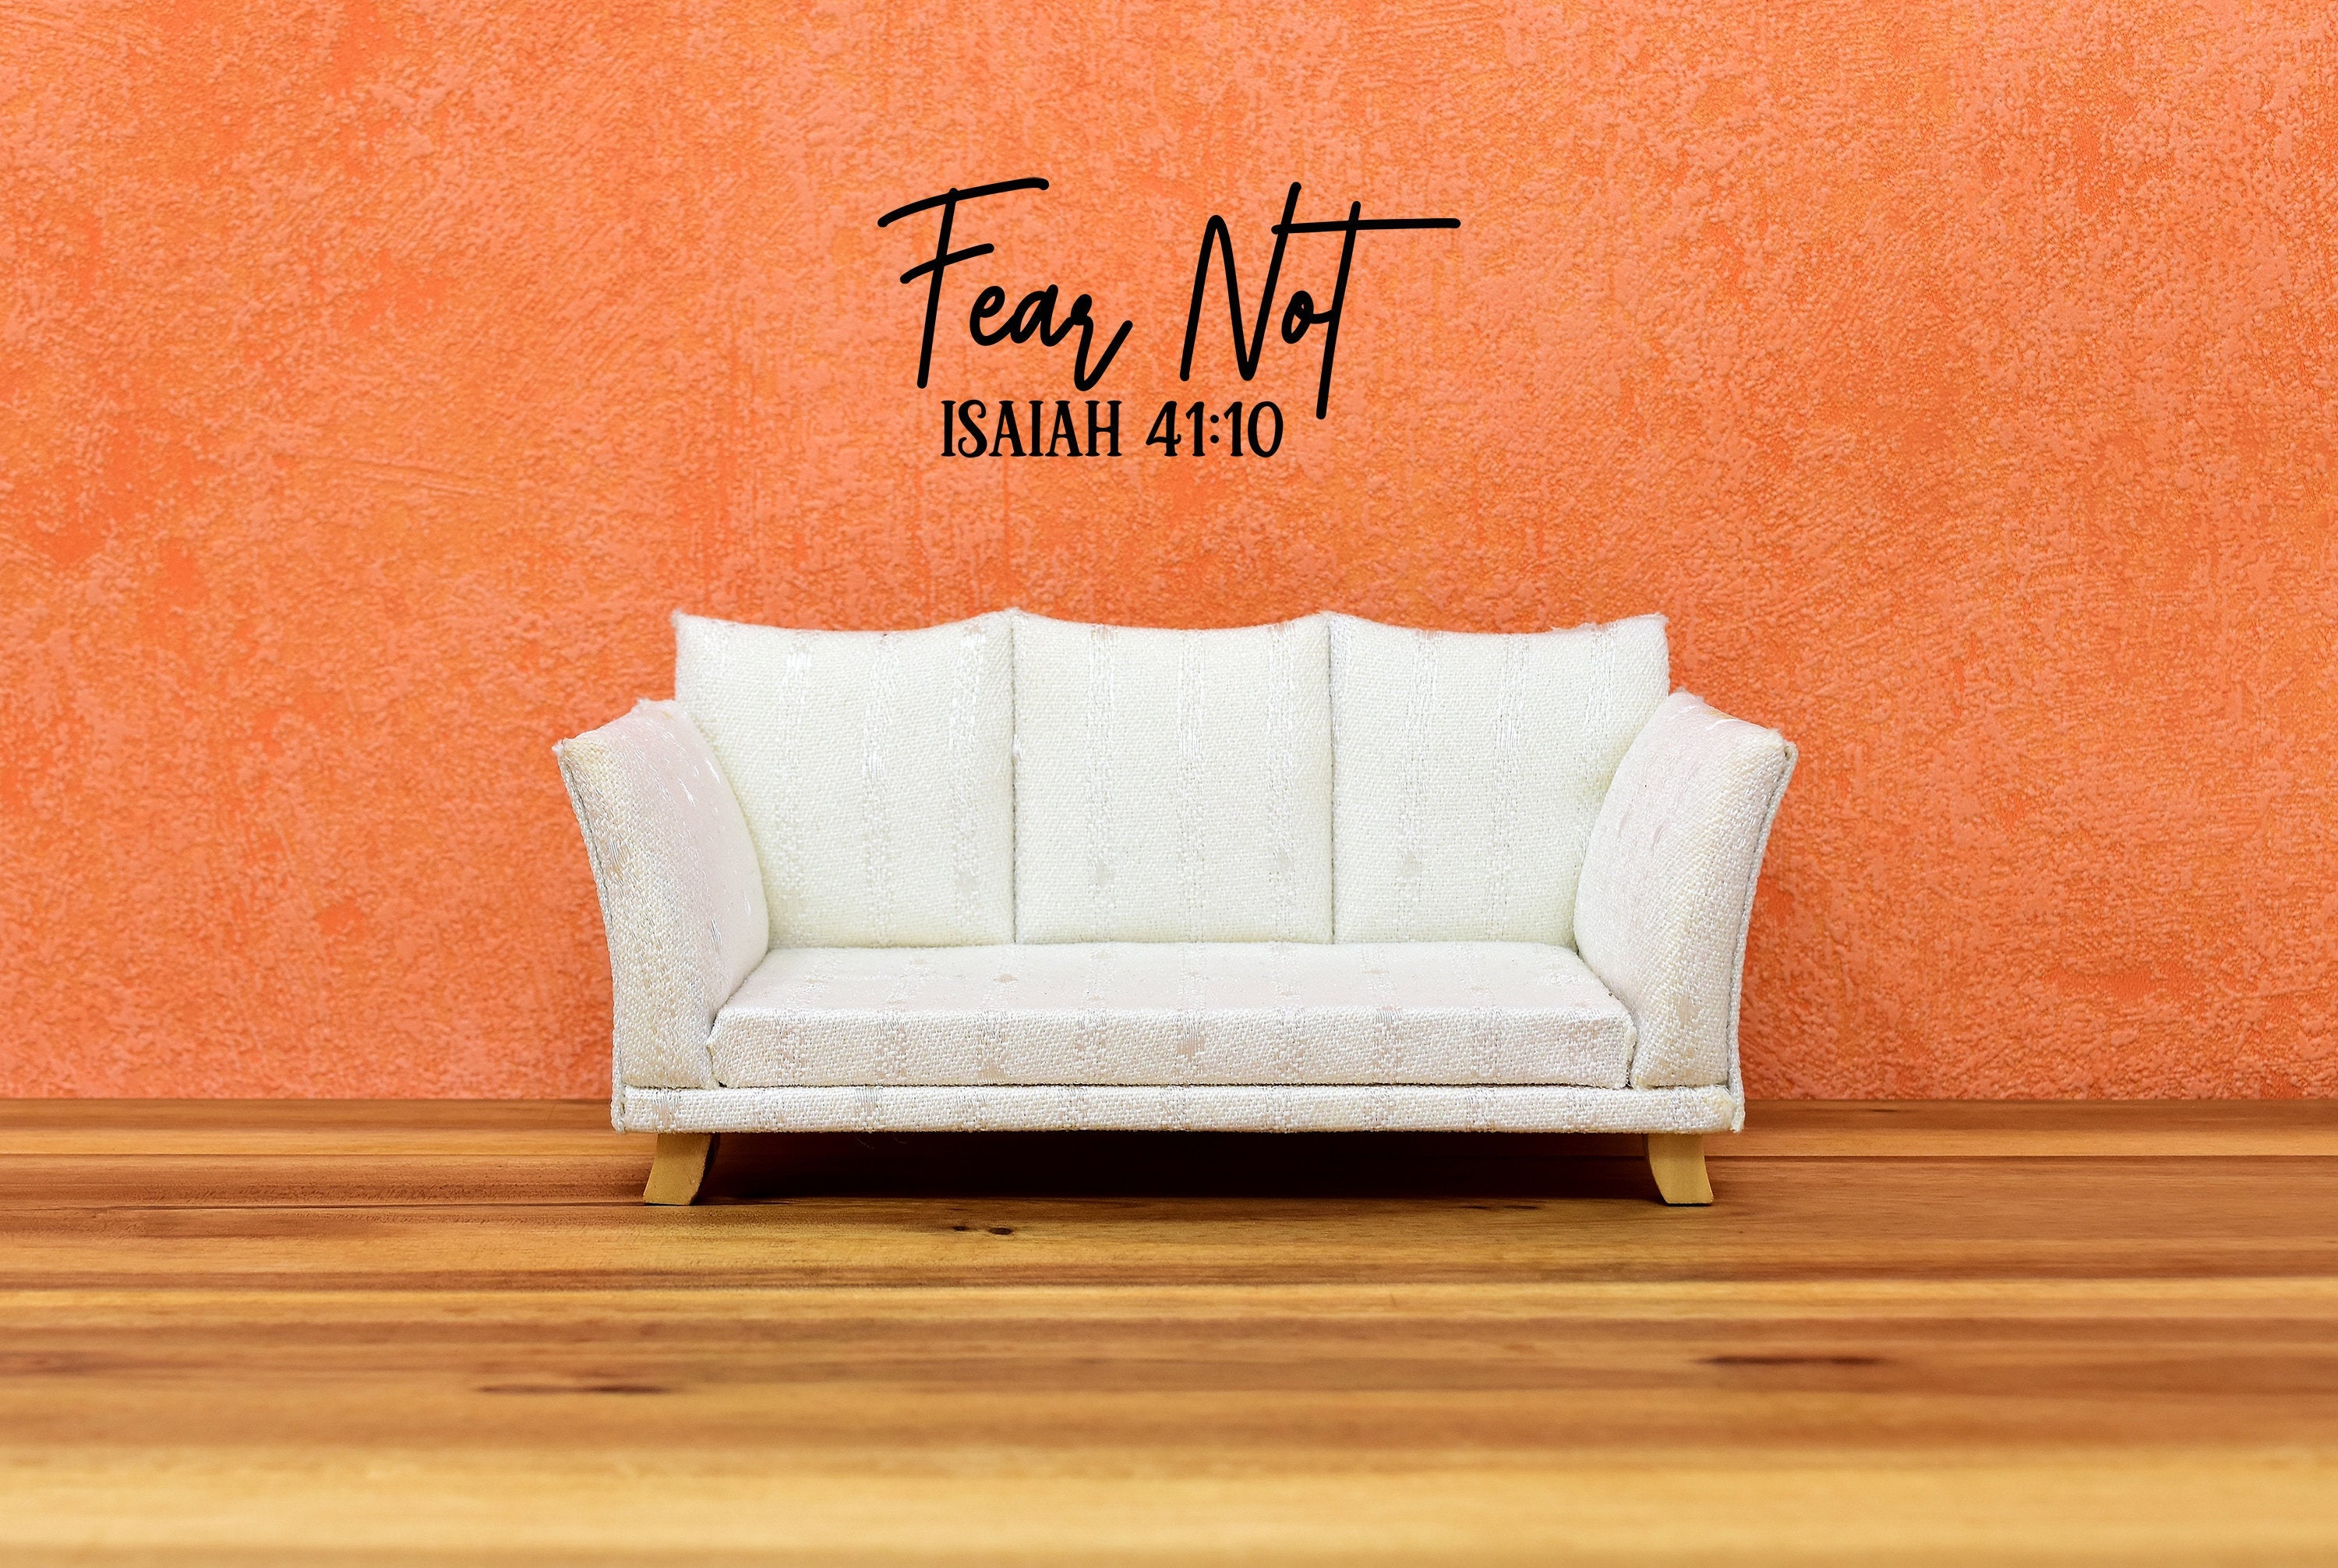 Fear Not  Vinyl Wall Decal Isaiah 41:10 - Religious, Christian Home Decor for Doors, Housewarming Gift,